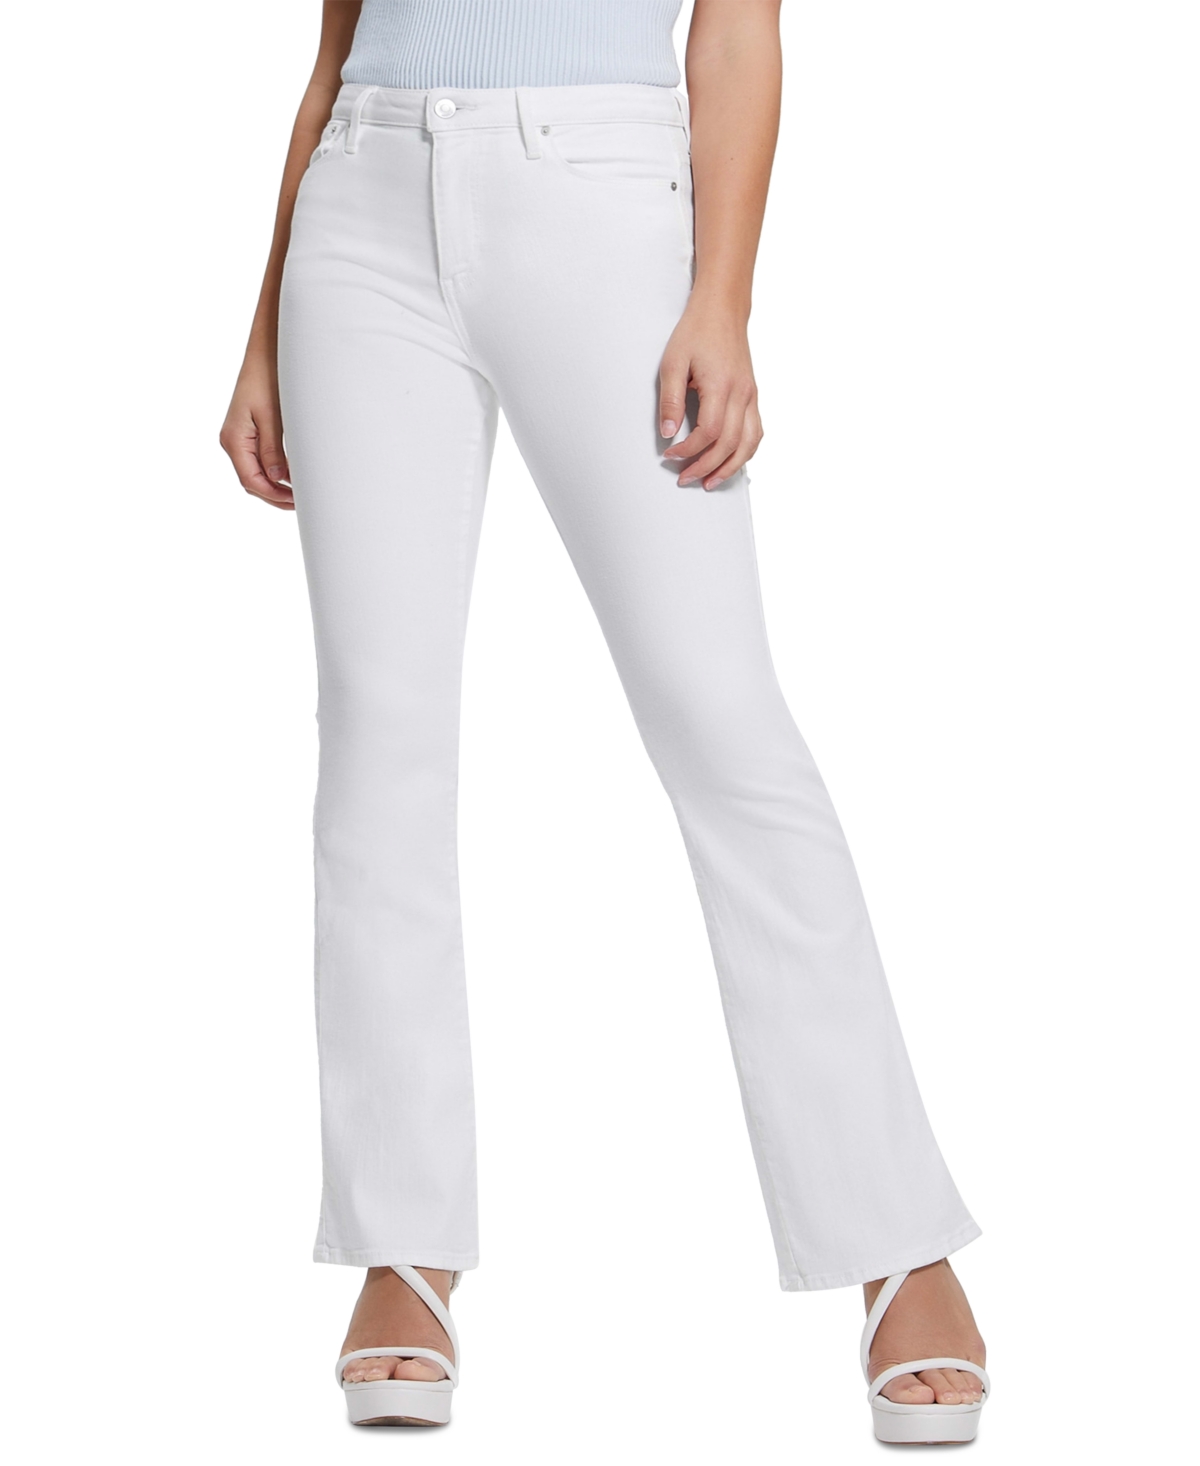  Guess Women's Eco Sexy High-Rise Flared Jeans